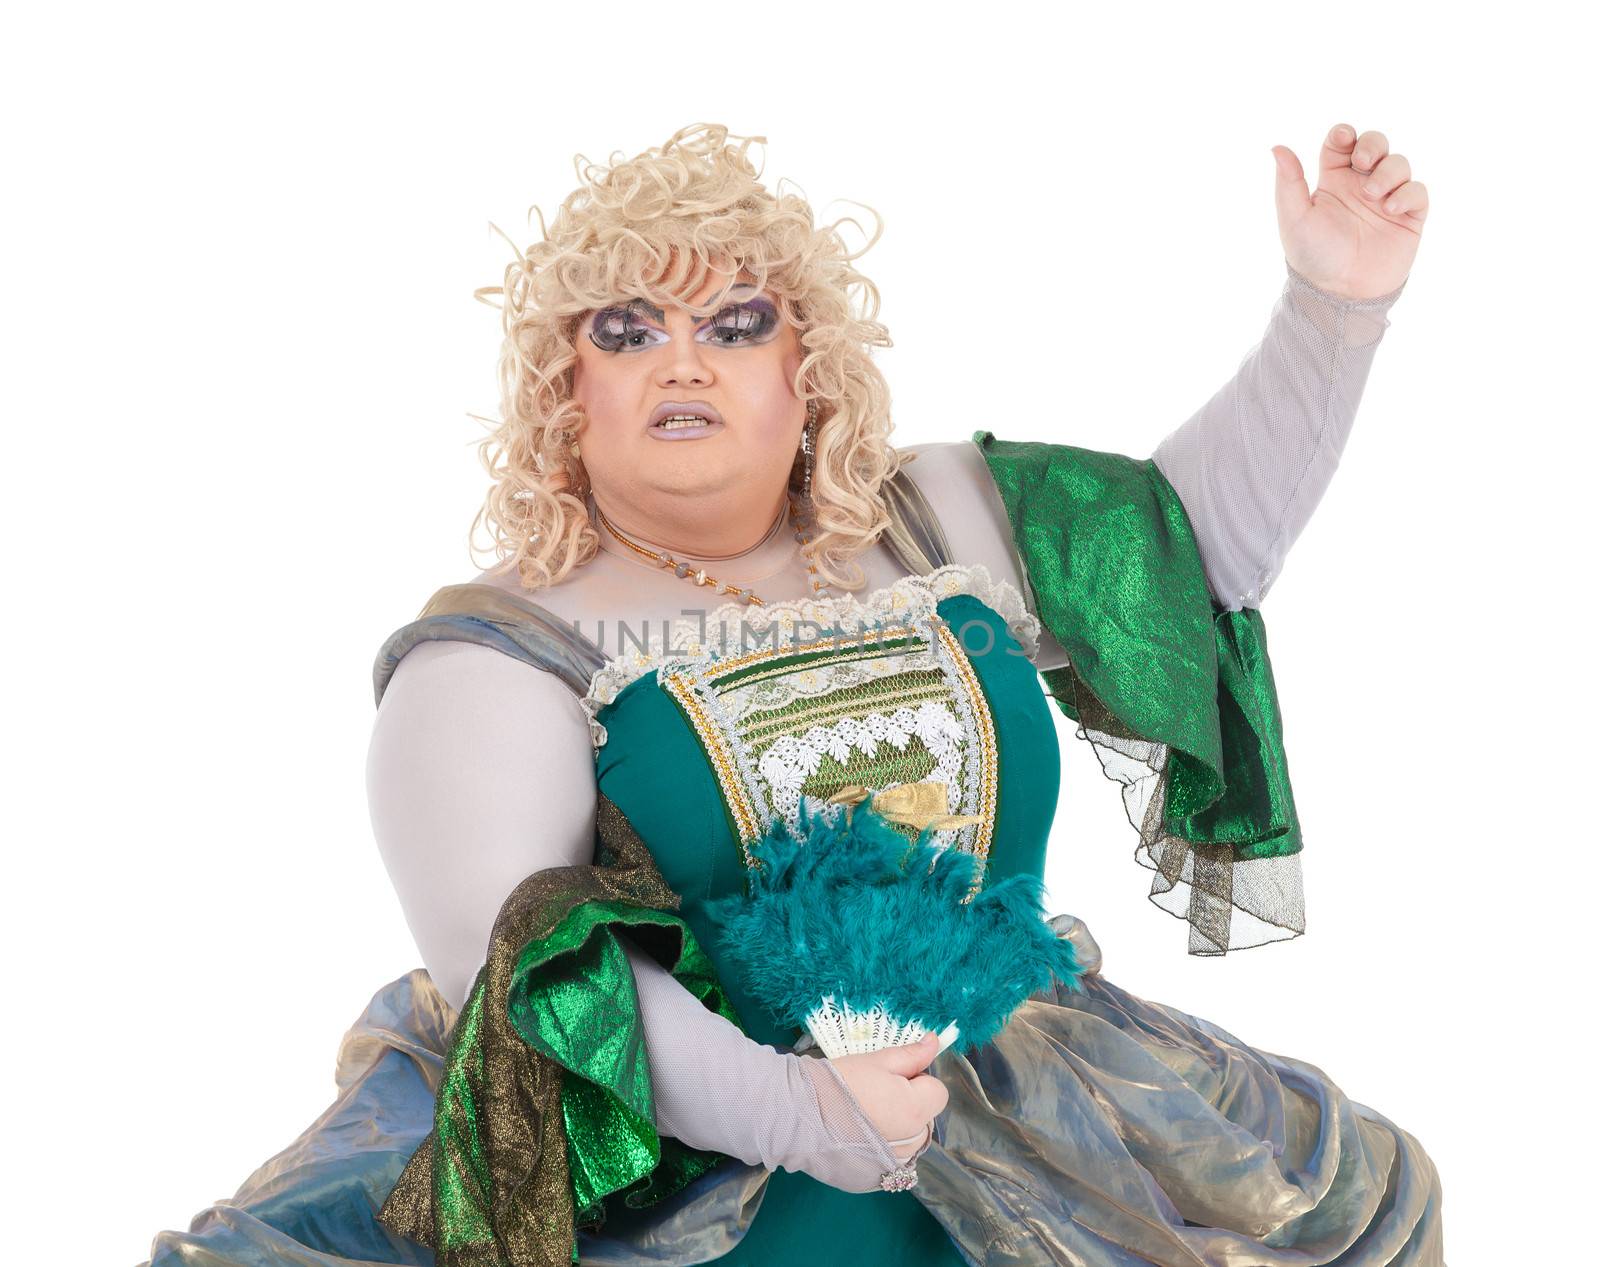 Overweight drag queen in vintage dress and pretty curly blond wig accentuating his weight with Victorian bustles in a fun caricature of a period woman, on white